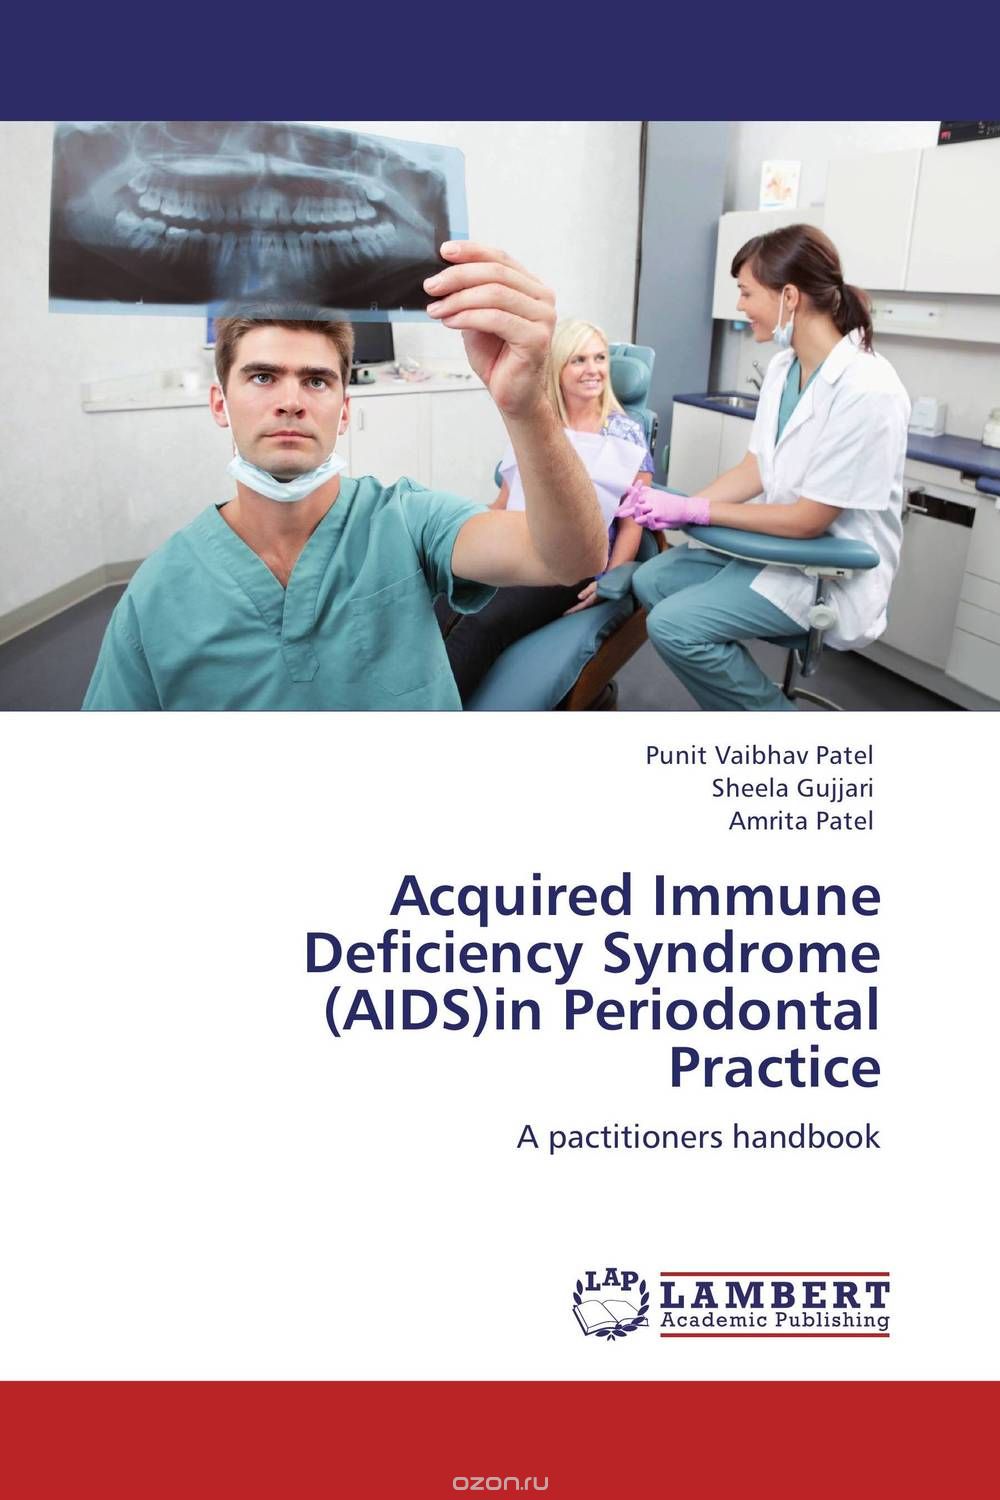 Скачать книгу "Acquired Immune Deficiency Syndrome (AIDS)in Periodontal Practice"